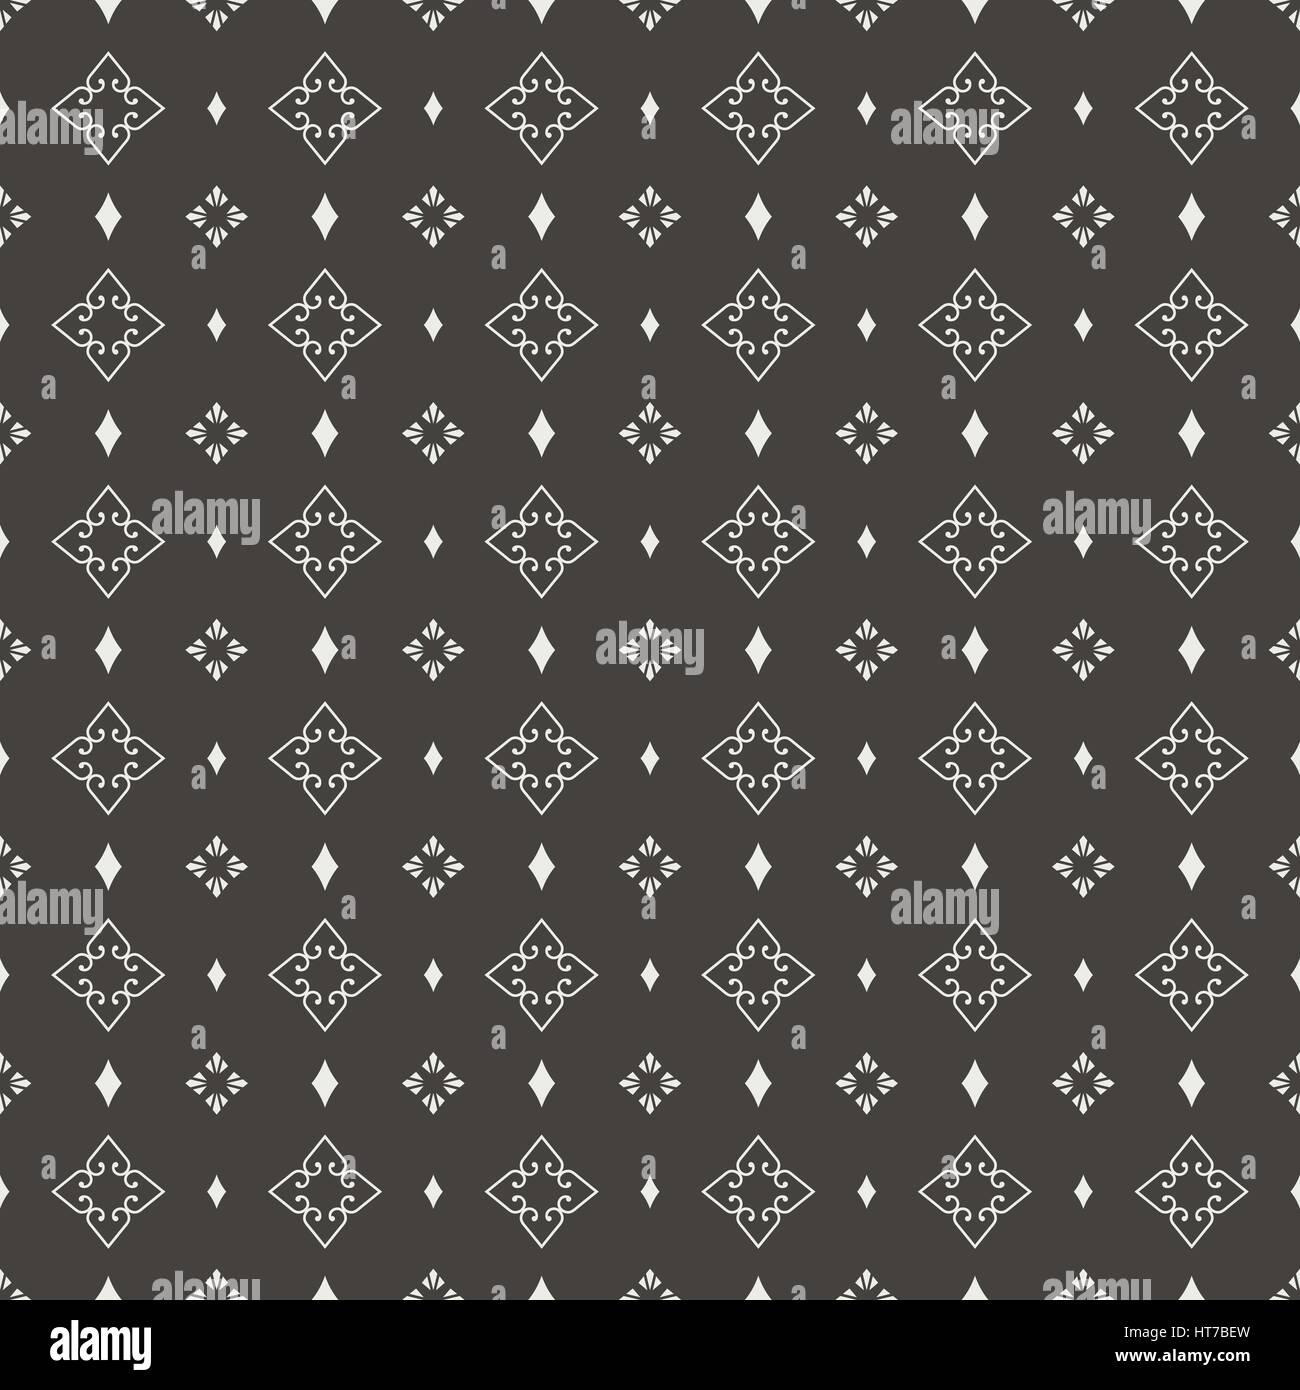 Seamless pattern. Abstract ornamental background. Black and white texture with regularly repeating geometrical, shapes, hearts, rhombuses. Vector elem Stock Vector